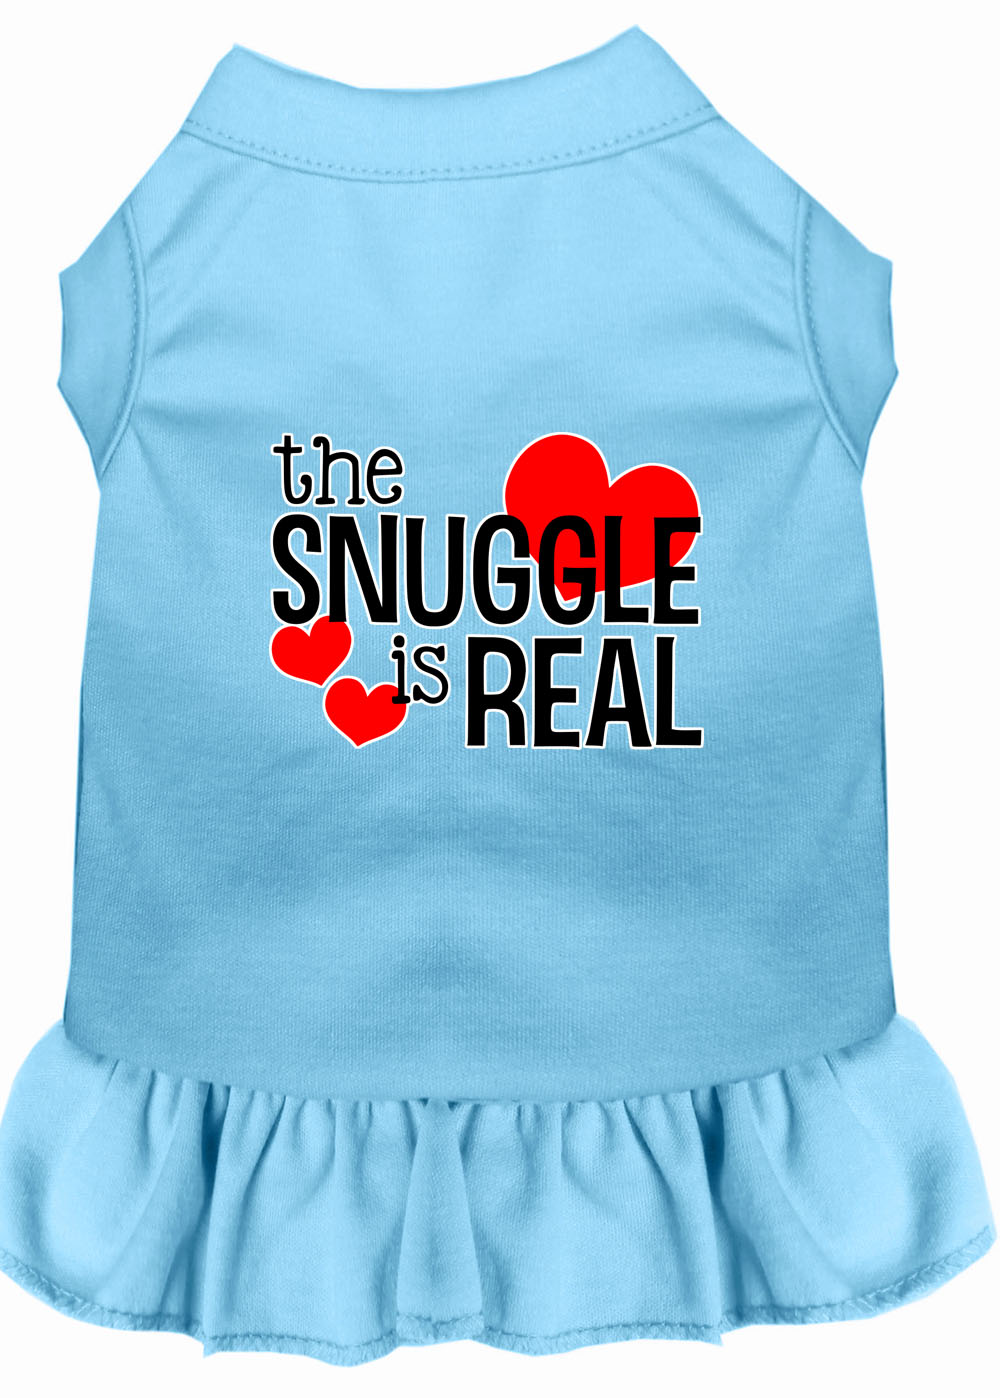 The Snuggle is Real Screen Print Dog Dress Baby Blue 4X